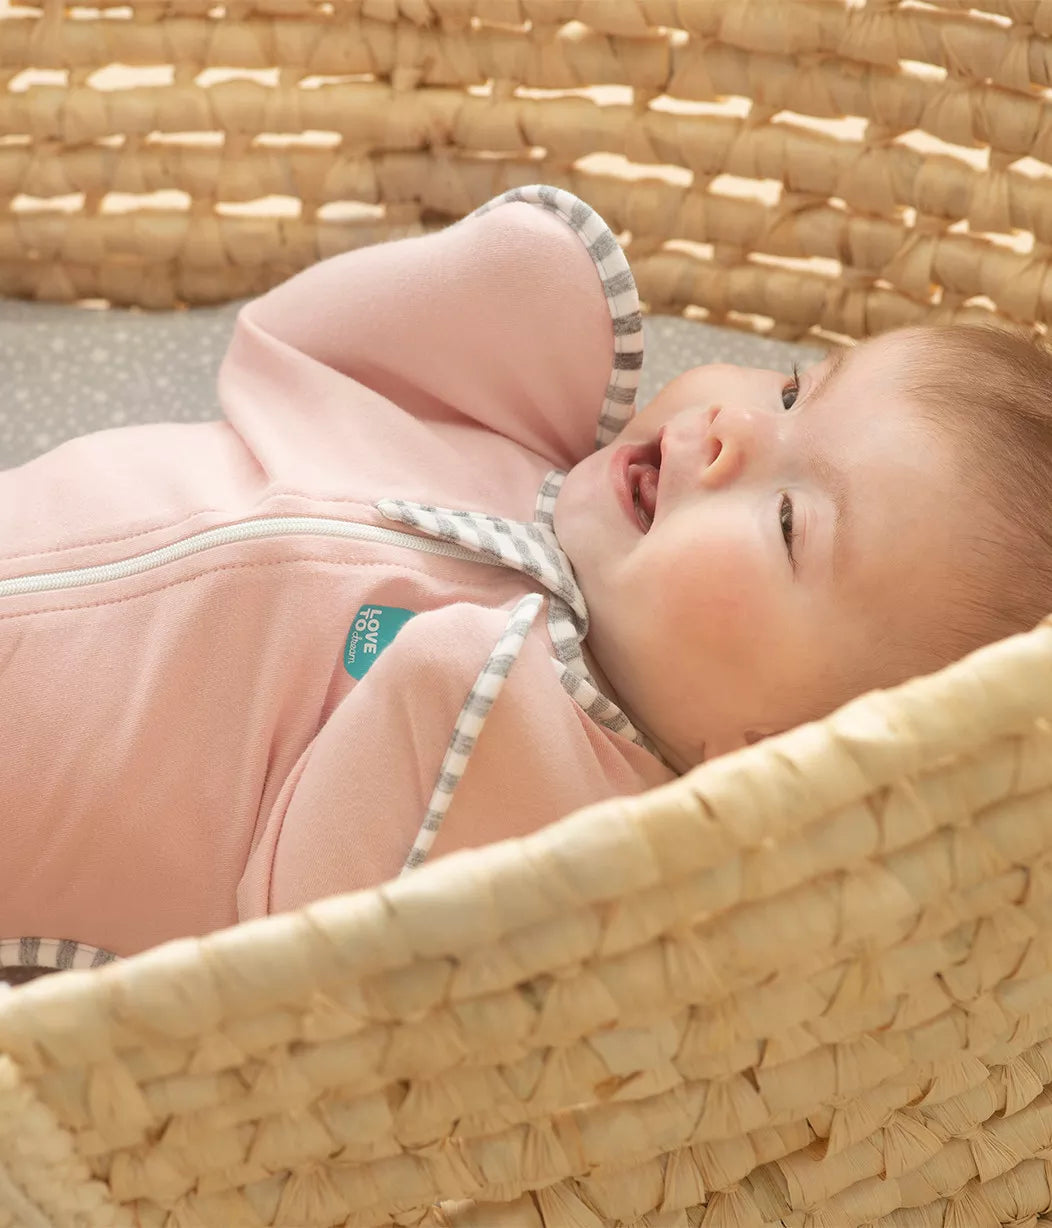 Love To Dream - Swaddle UP Original - Dusty Pink Swaddles Love To Dream 